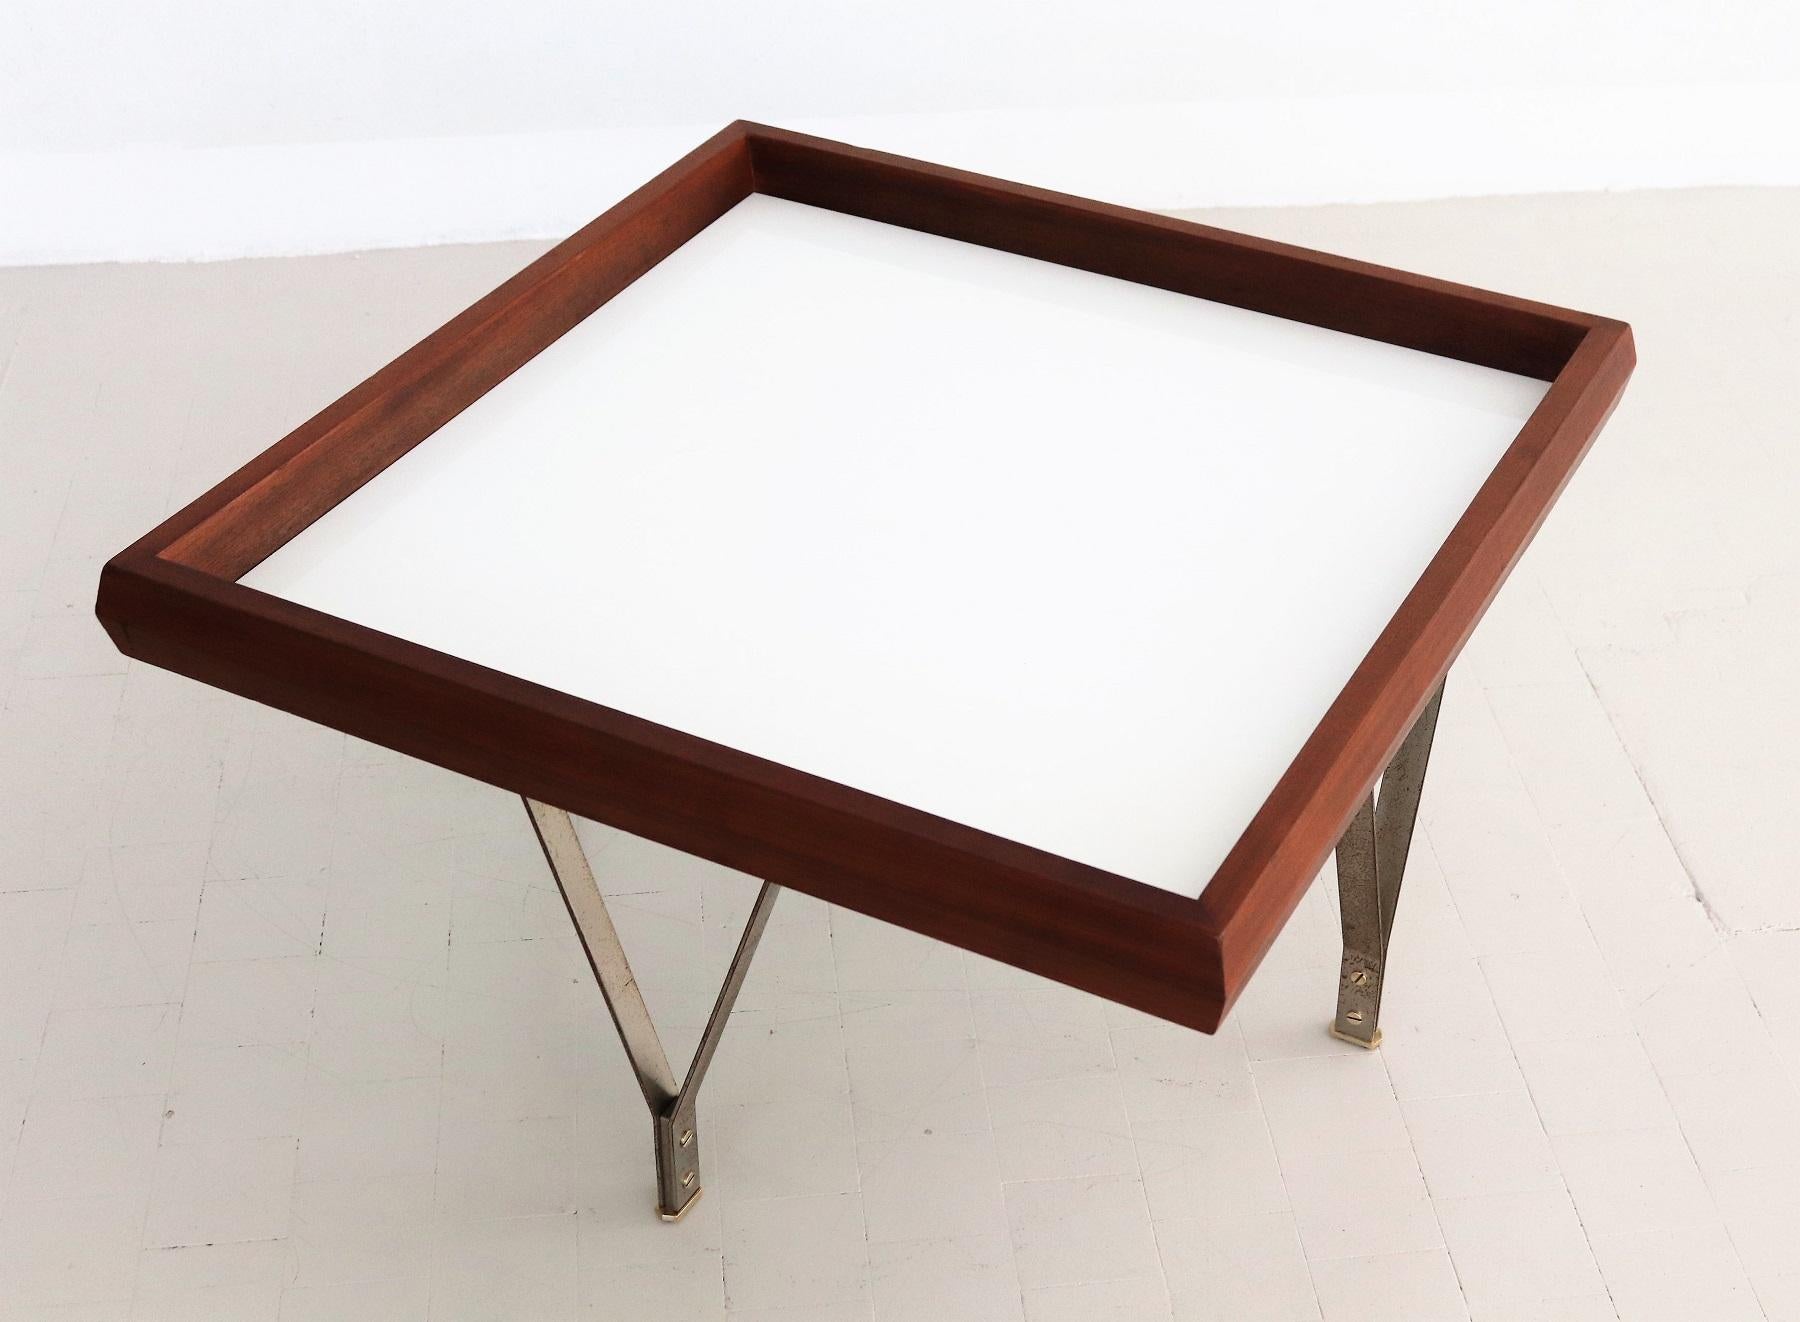 Brass Italian Midcentury Modern Coffee Table in Mahogany and Glass, 1960s